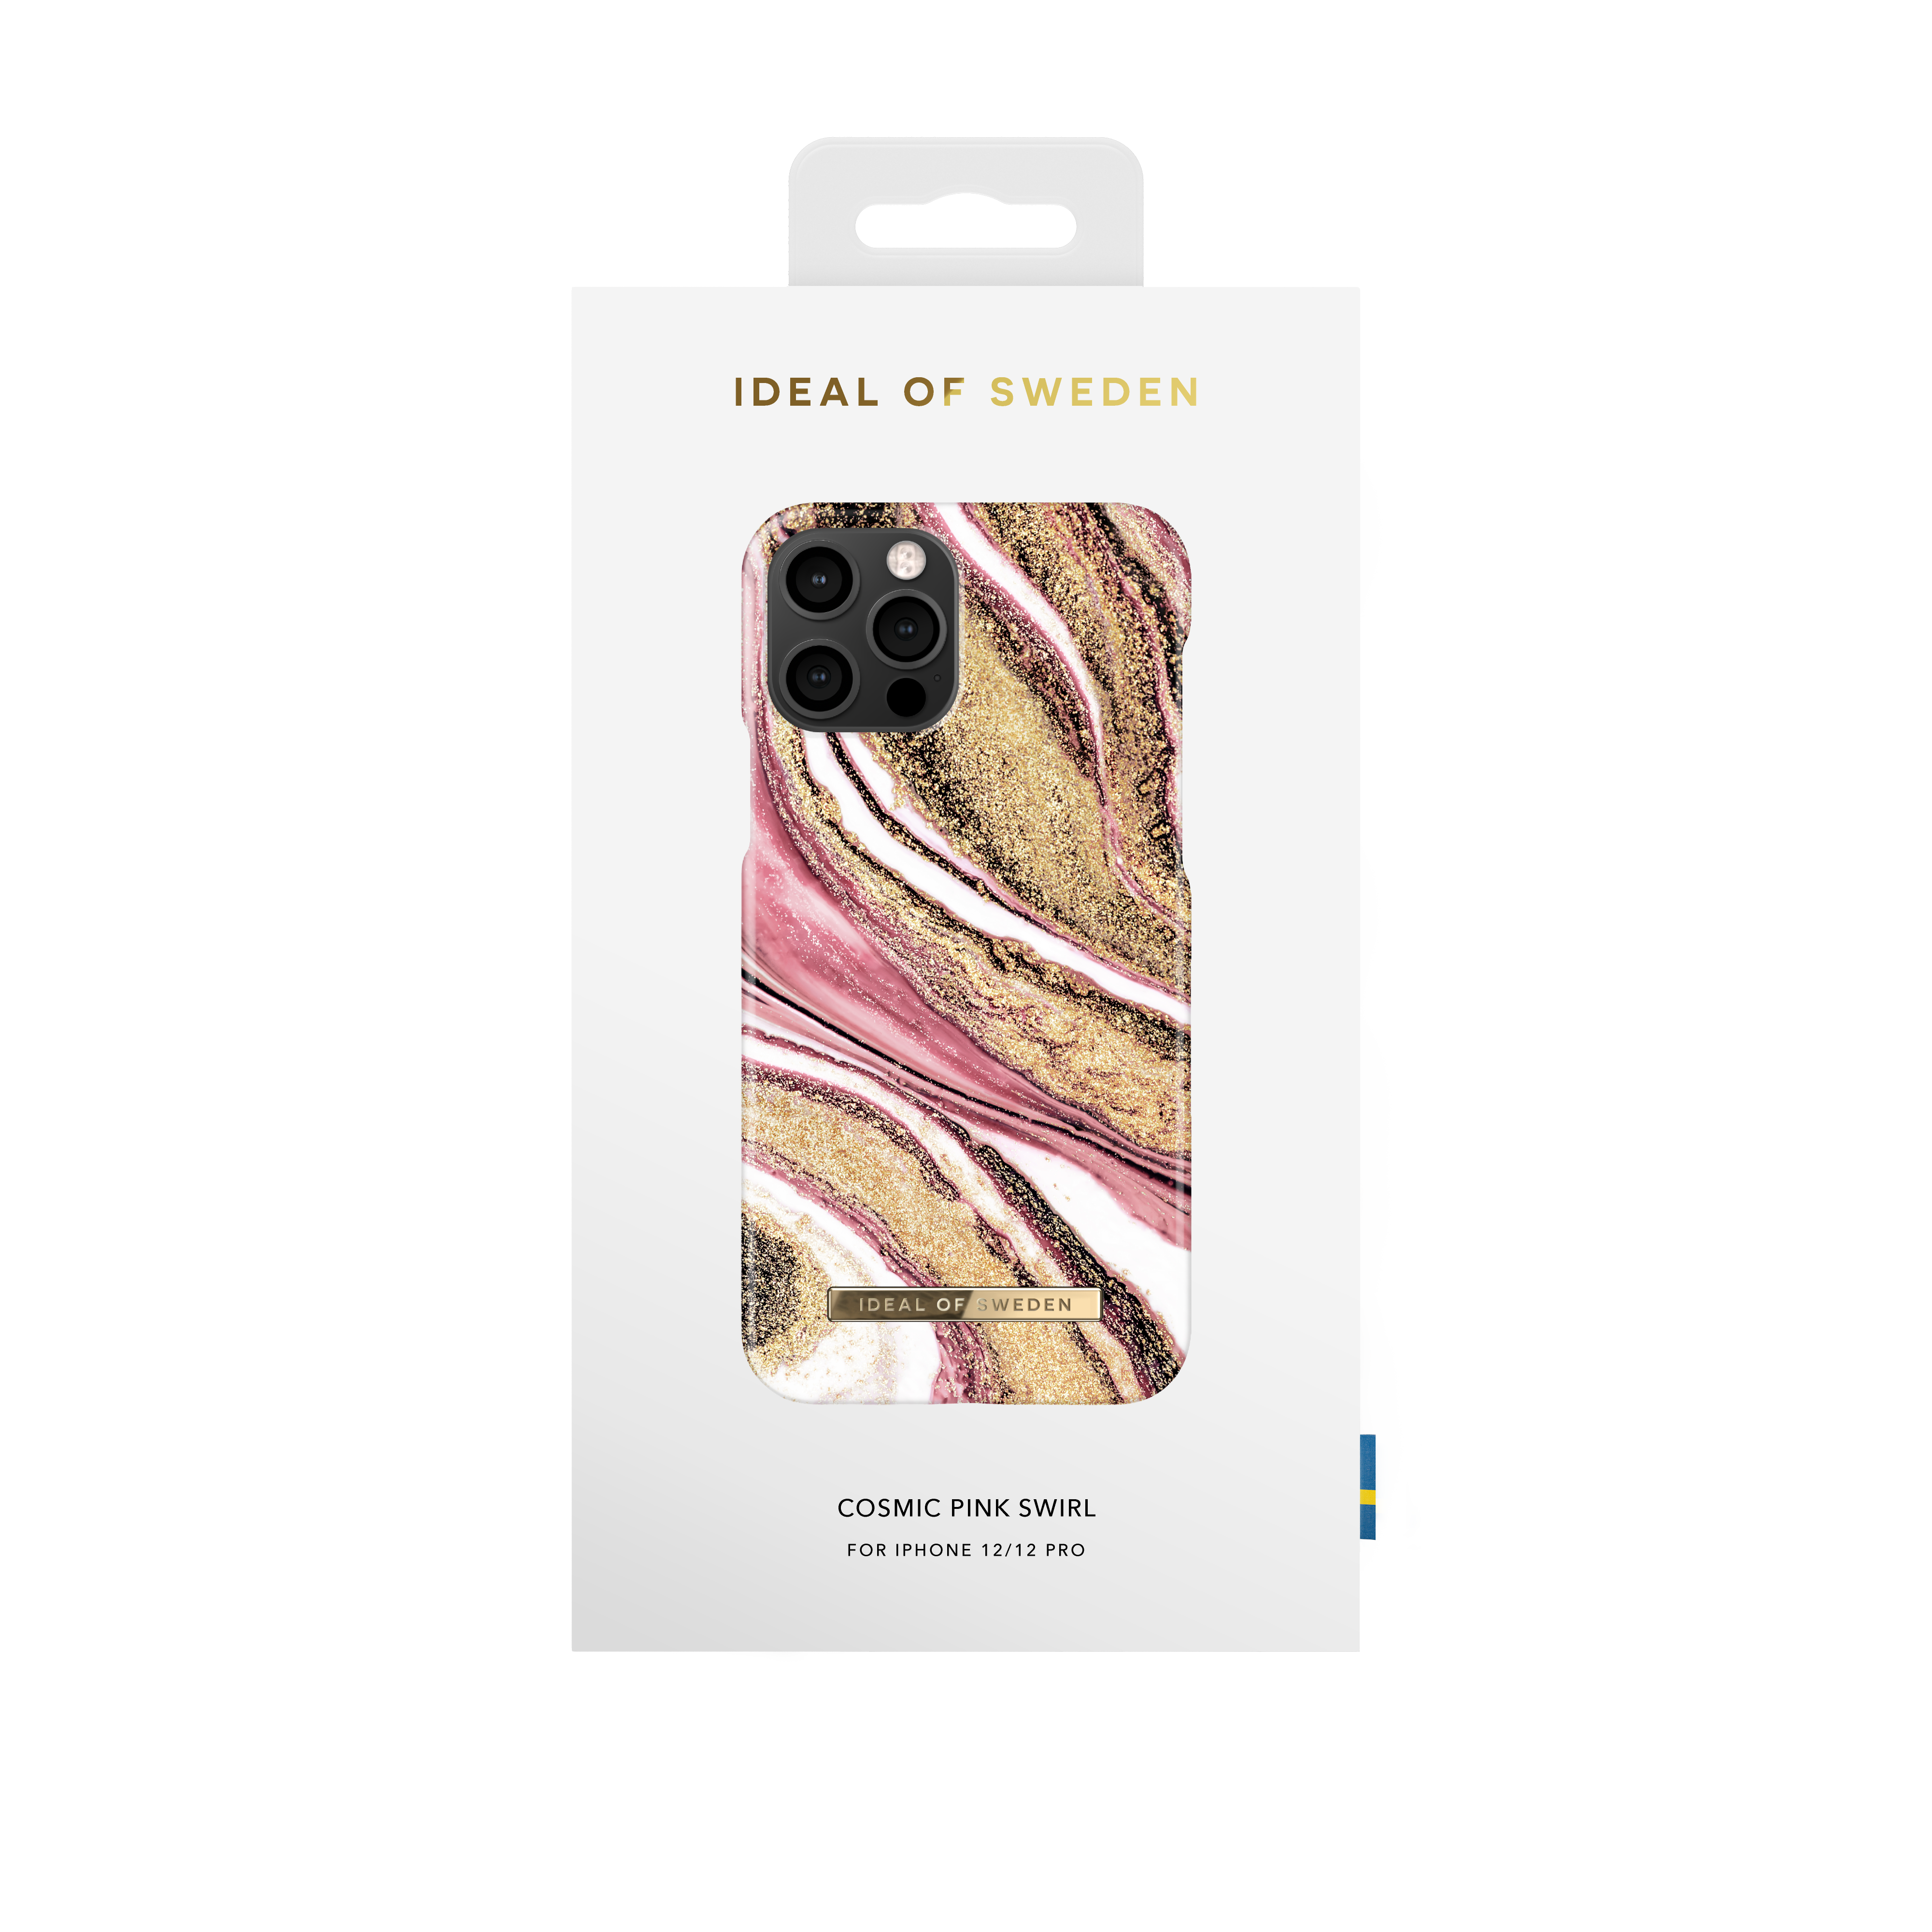 IDFCSS20-I2061-193, Cosmic 12, OF Pink Swirl SWEDEN iPhone iPhone Backcover, IDEAL Pro, 12 Apple,